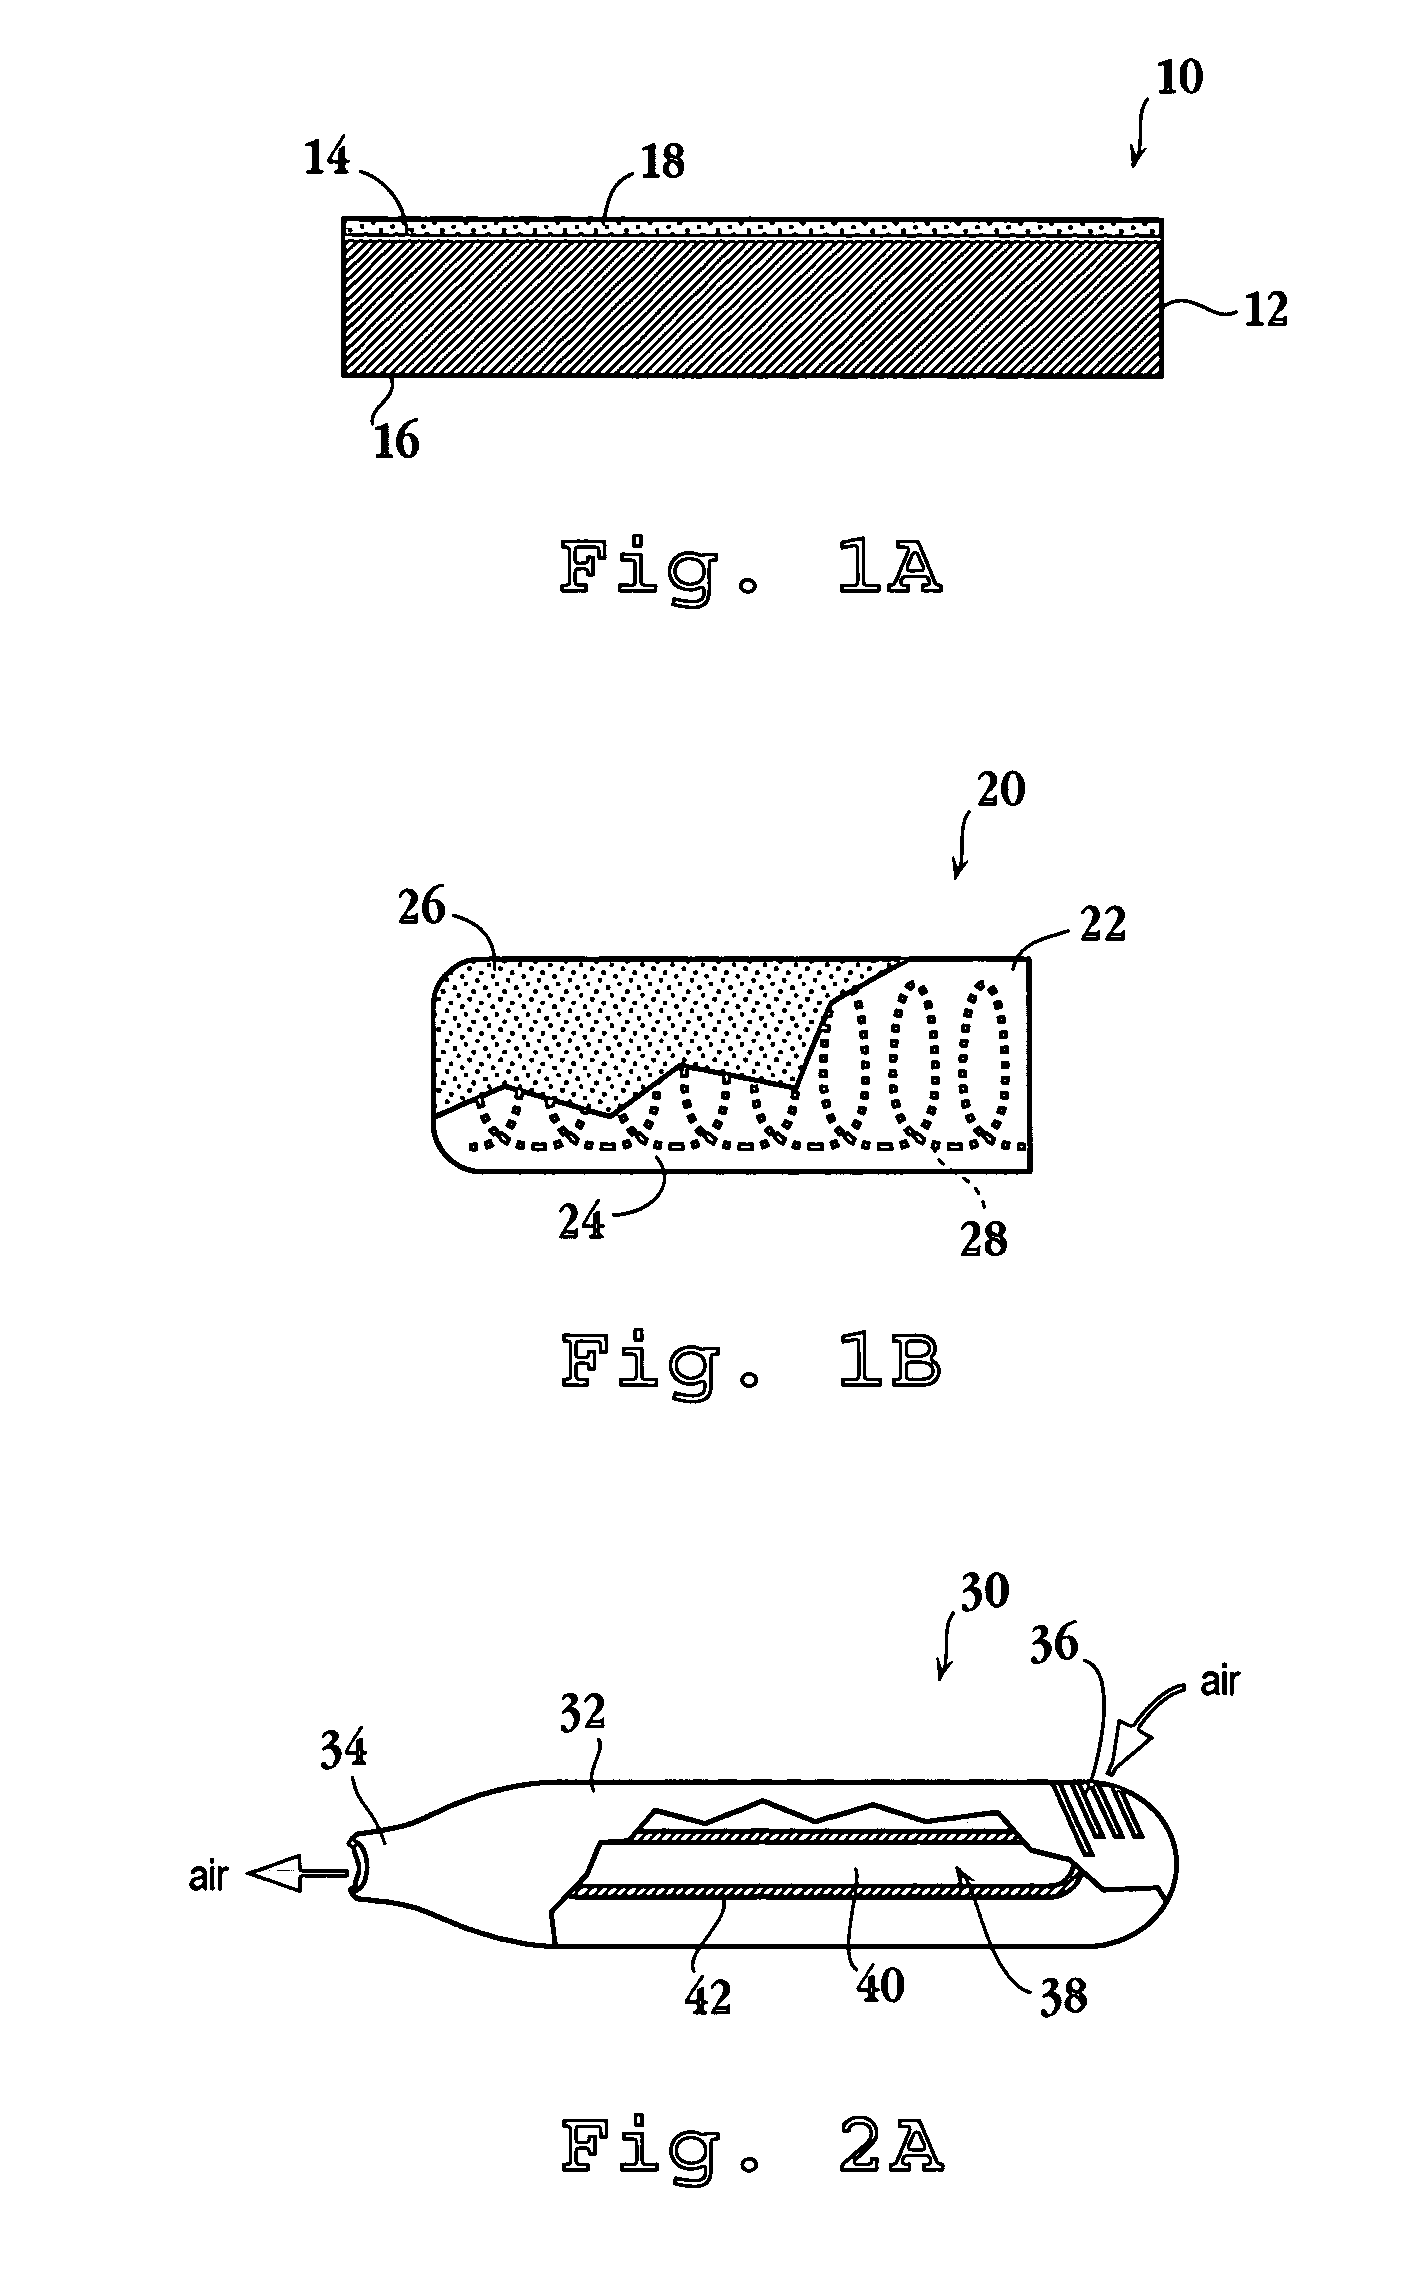 Methods of determining film thicknesses for an aerosol delivery article